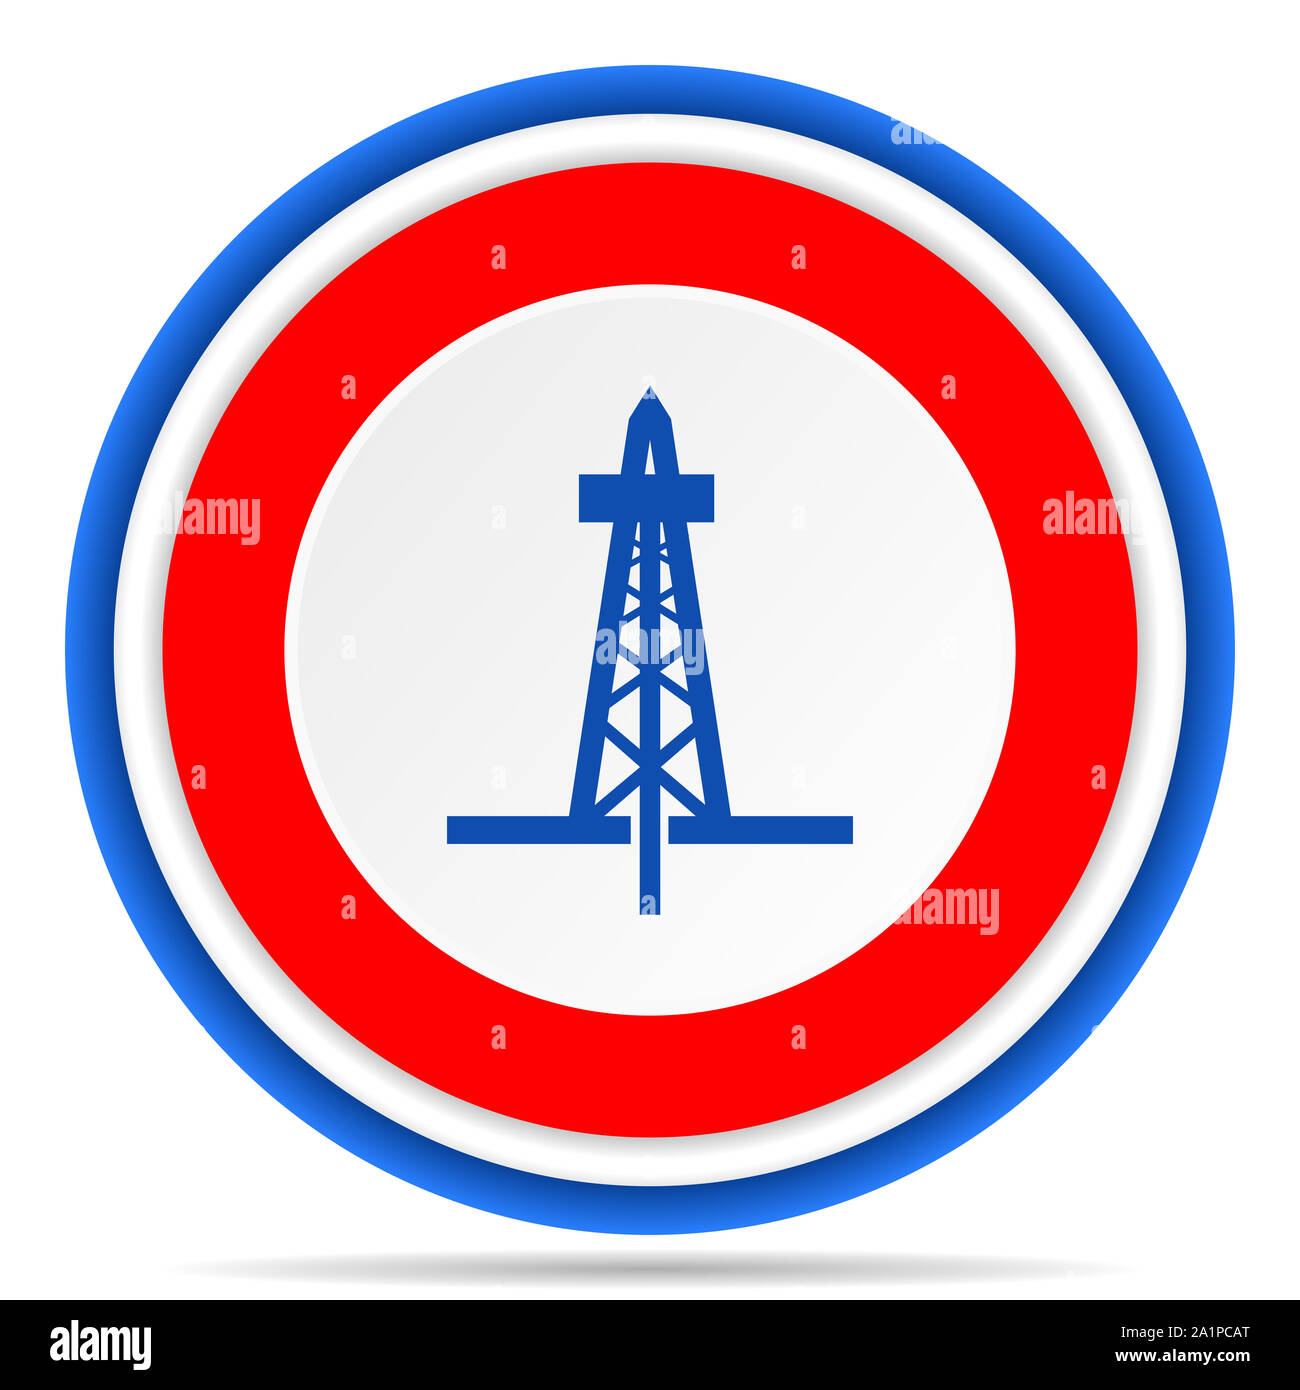 Drilling round icon, red, blue and white french design illustration for web, internet and mobile applications Stock Photo